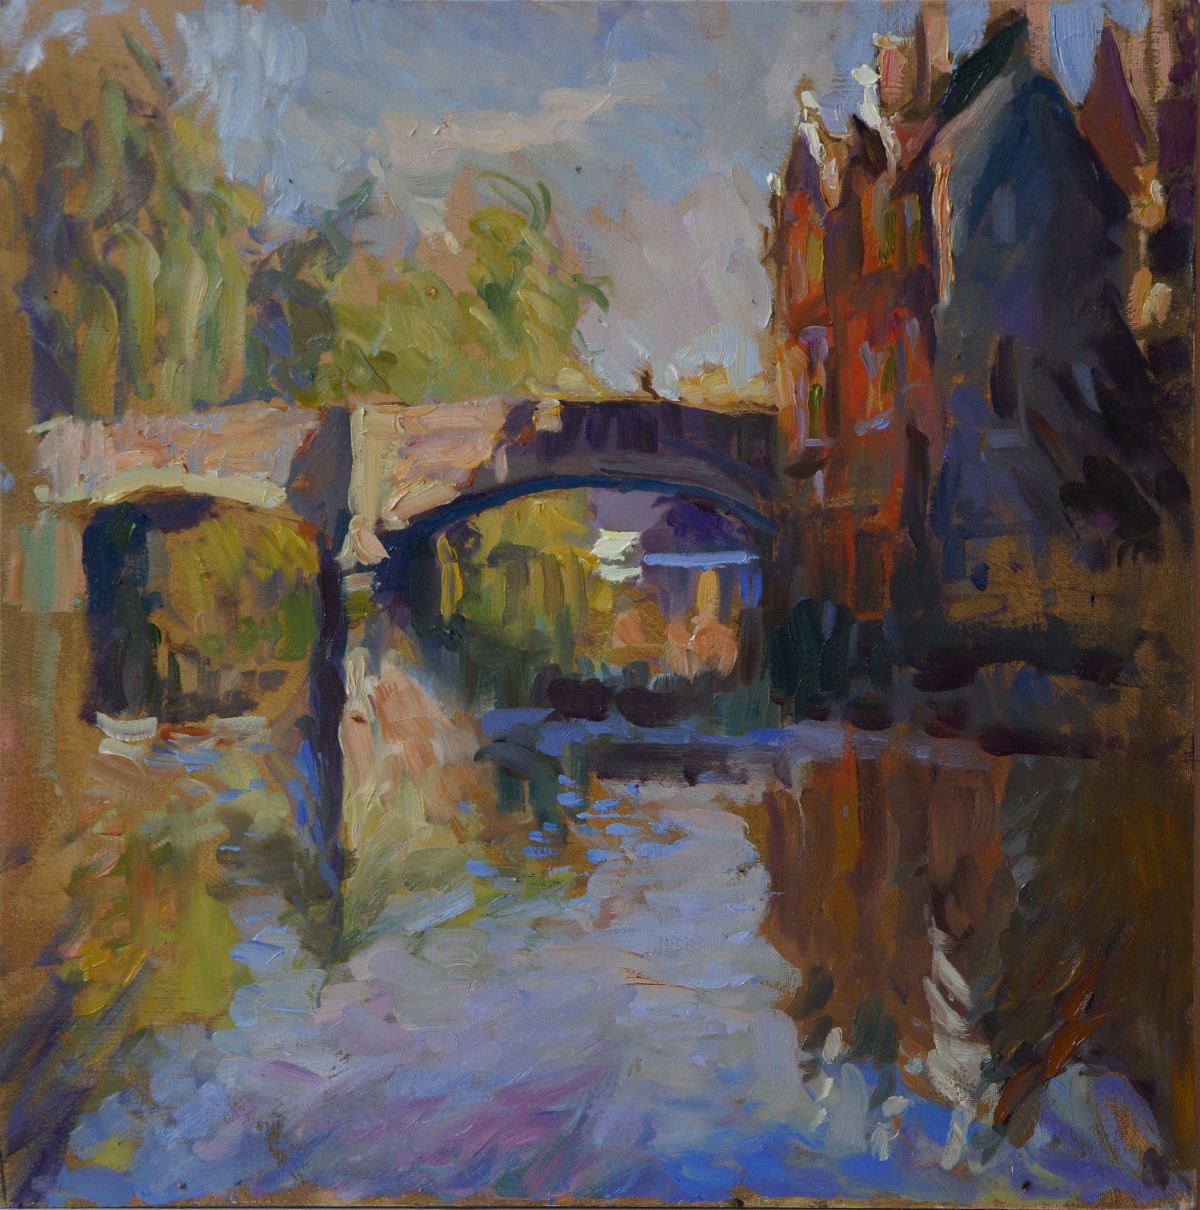 Rob Pointon, 'The Day After the Monet Lecture', St. Georges Bridge, Oil, 40x40cm, <a href='http://www.paintout.org/artists/rob-pointon#buy' target='_blank'>FOR SALE</a>, £650